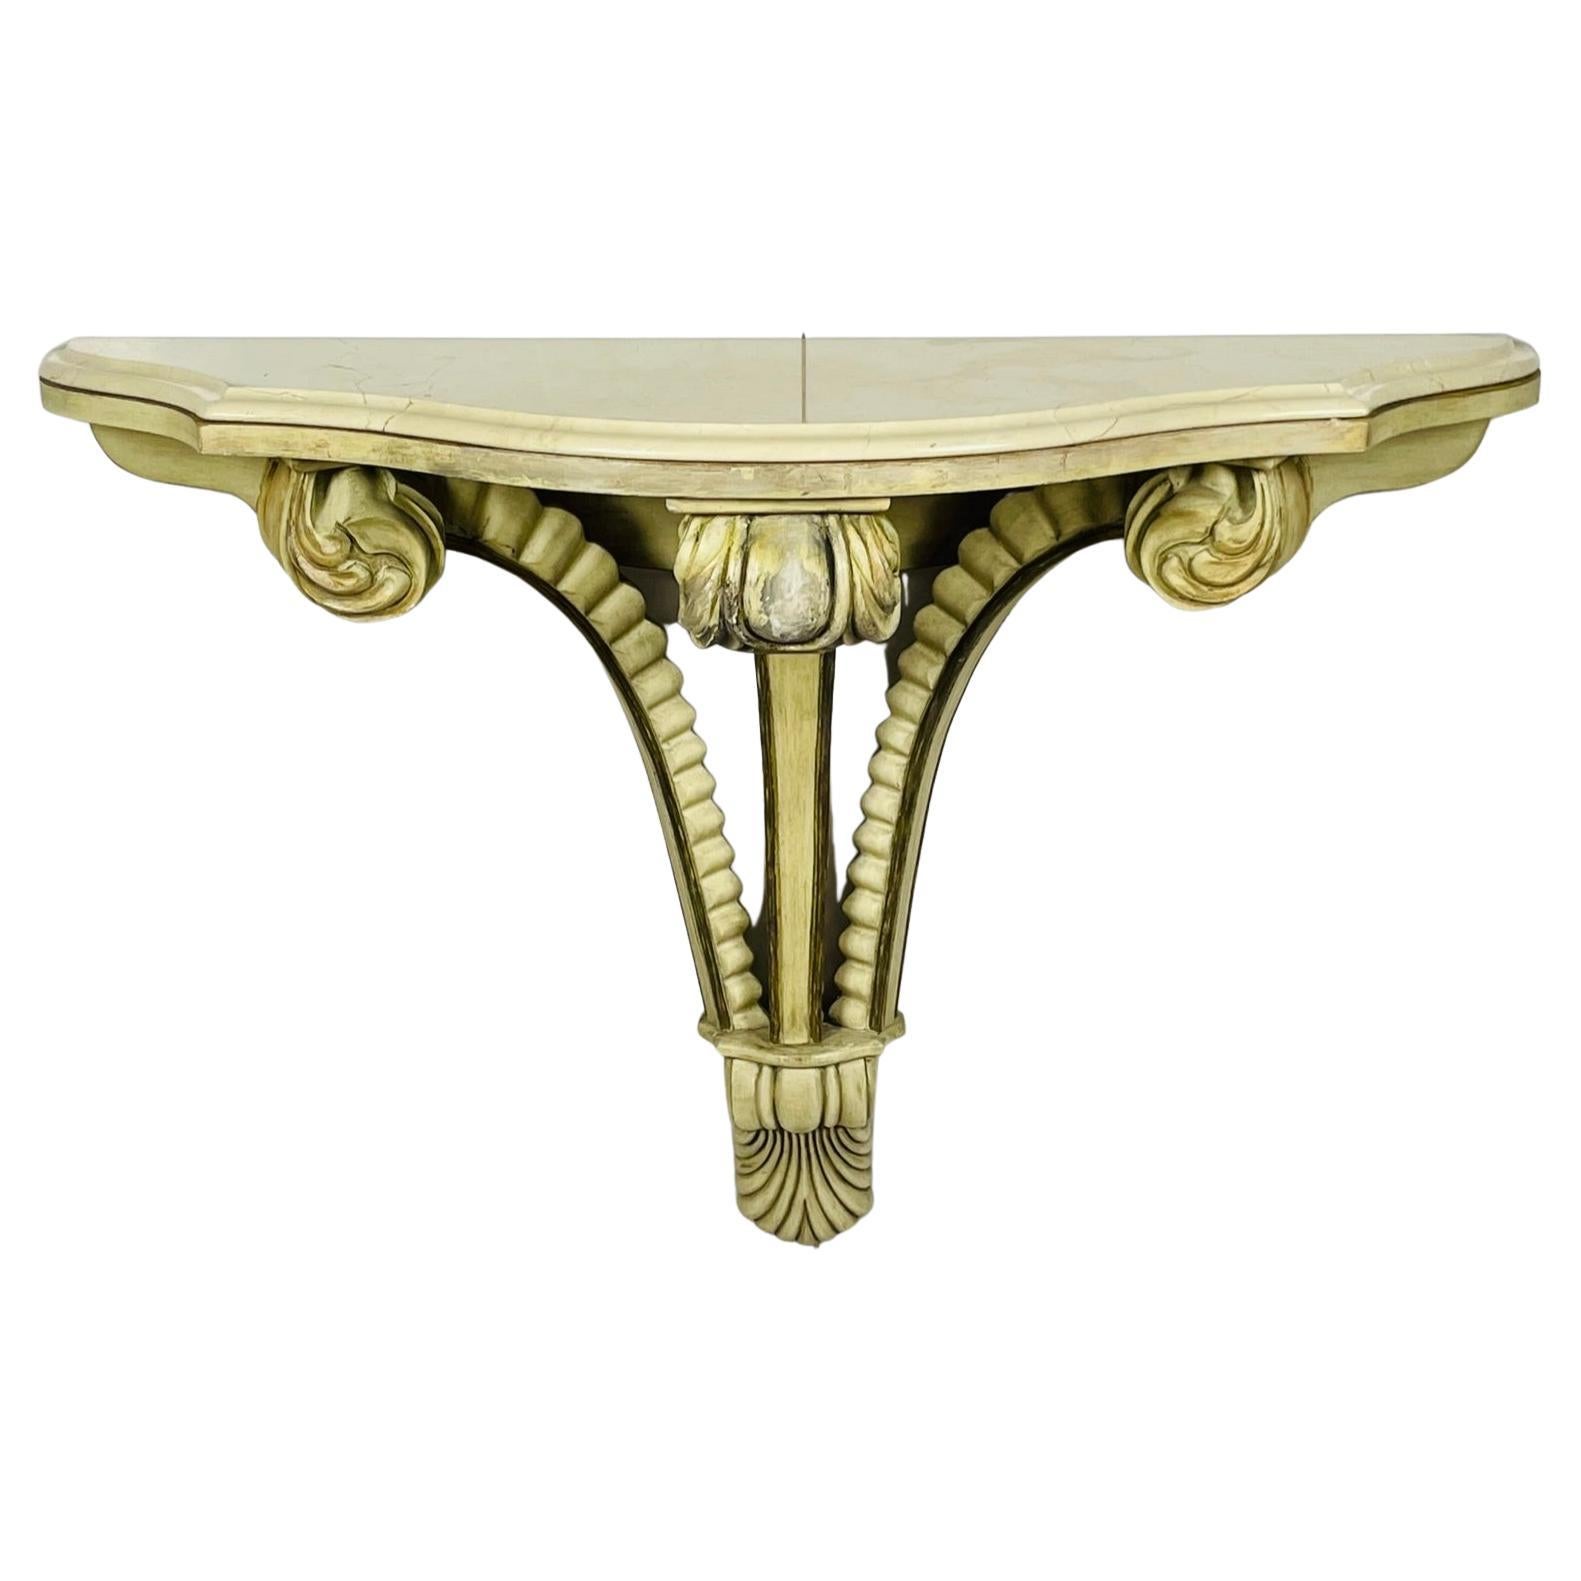 Art Deco Wall Console with a Marble Top, USA, 1940s